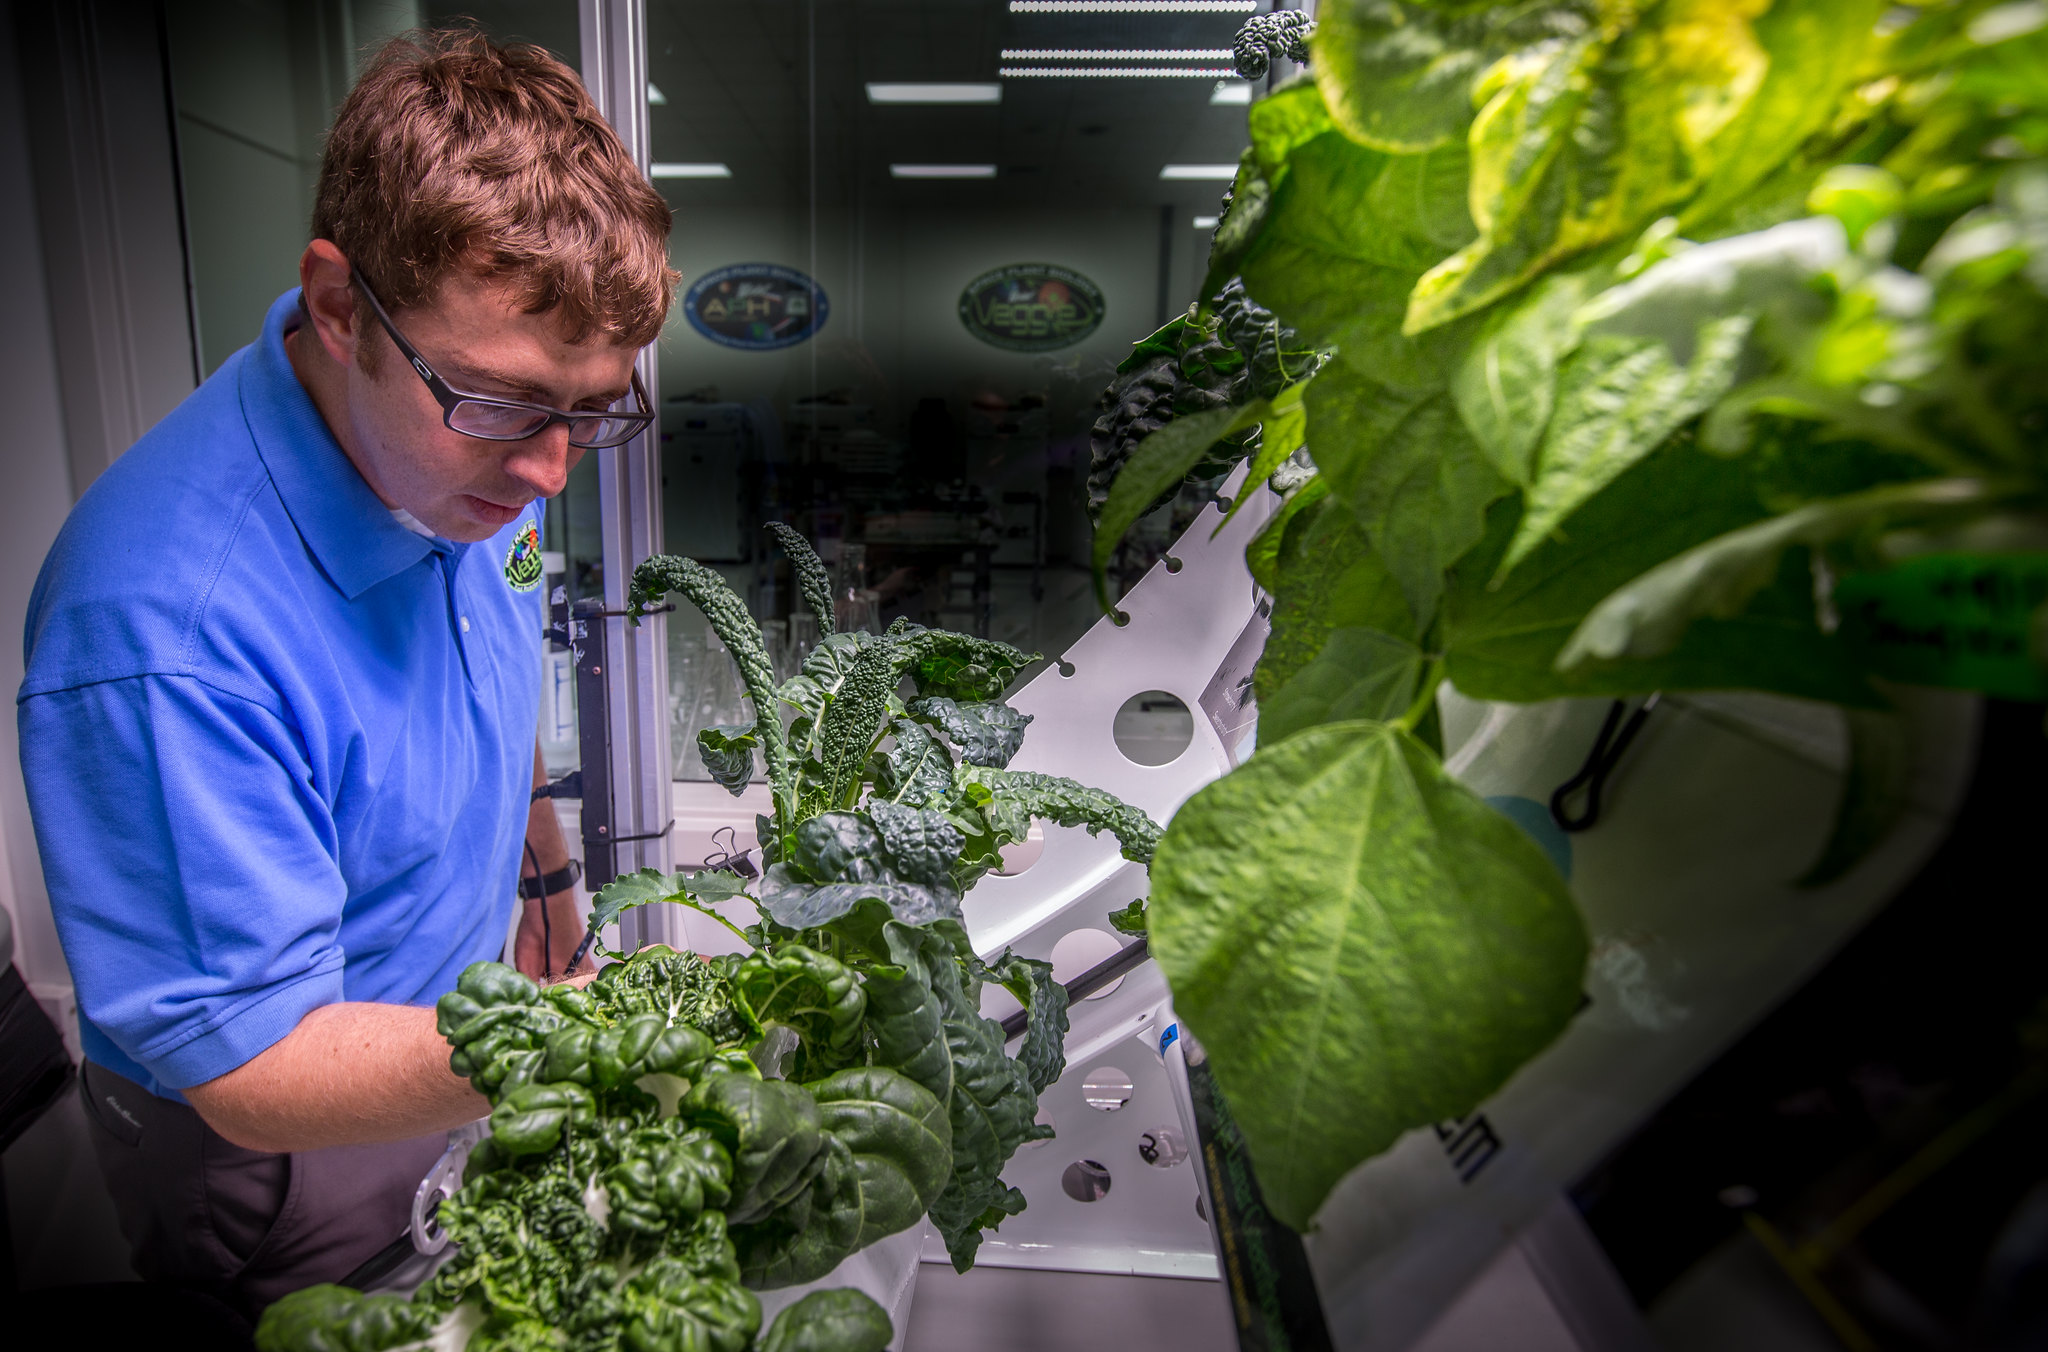 NASA's Matt Romeyn works in the Crop Food Production Research Area of the Space Station Processing Facility at the agency's Kennedy Space Center in Florida.